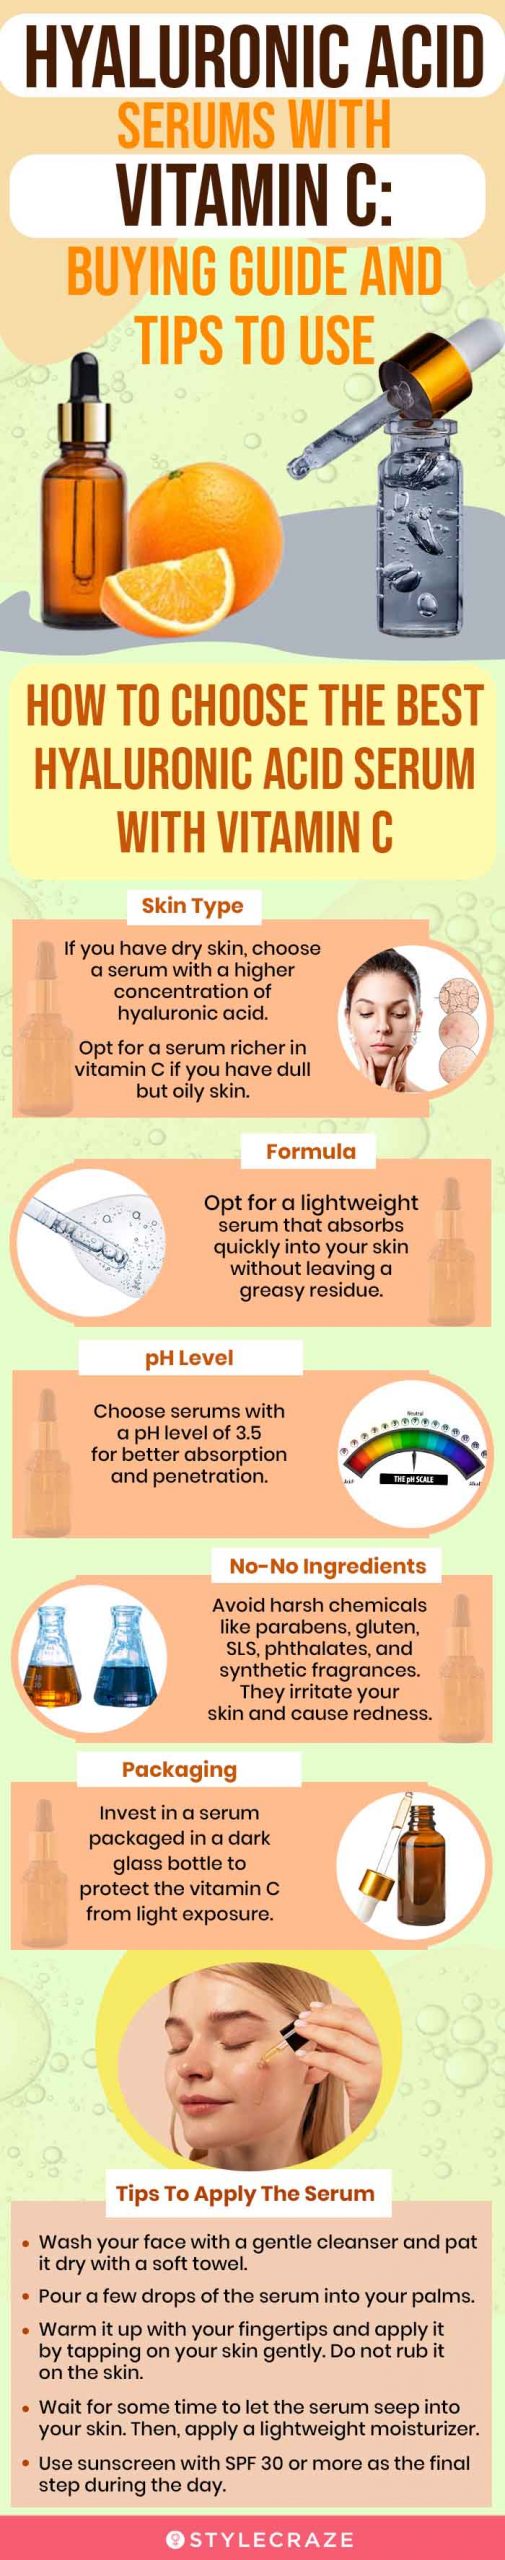 Hyaluronic Acid Serums With Vitamin C: Buying Guide And Tips To Use (infographic)